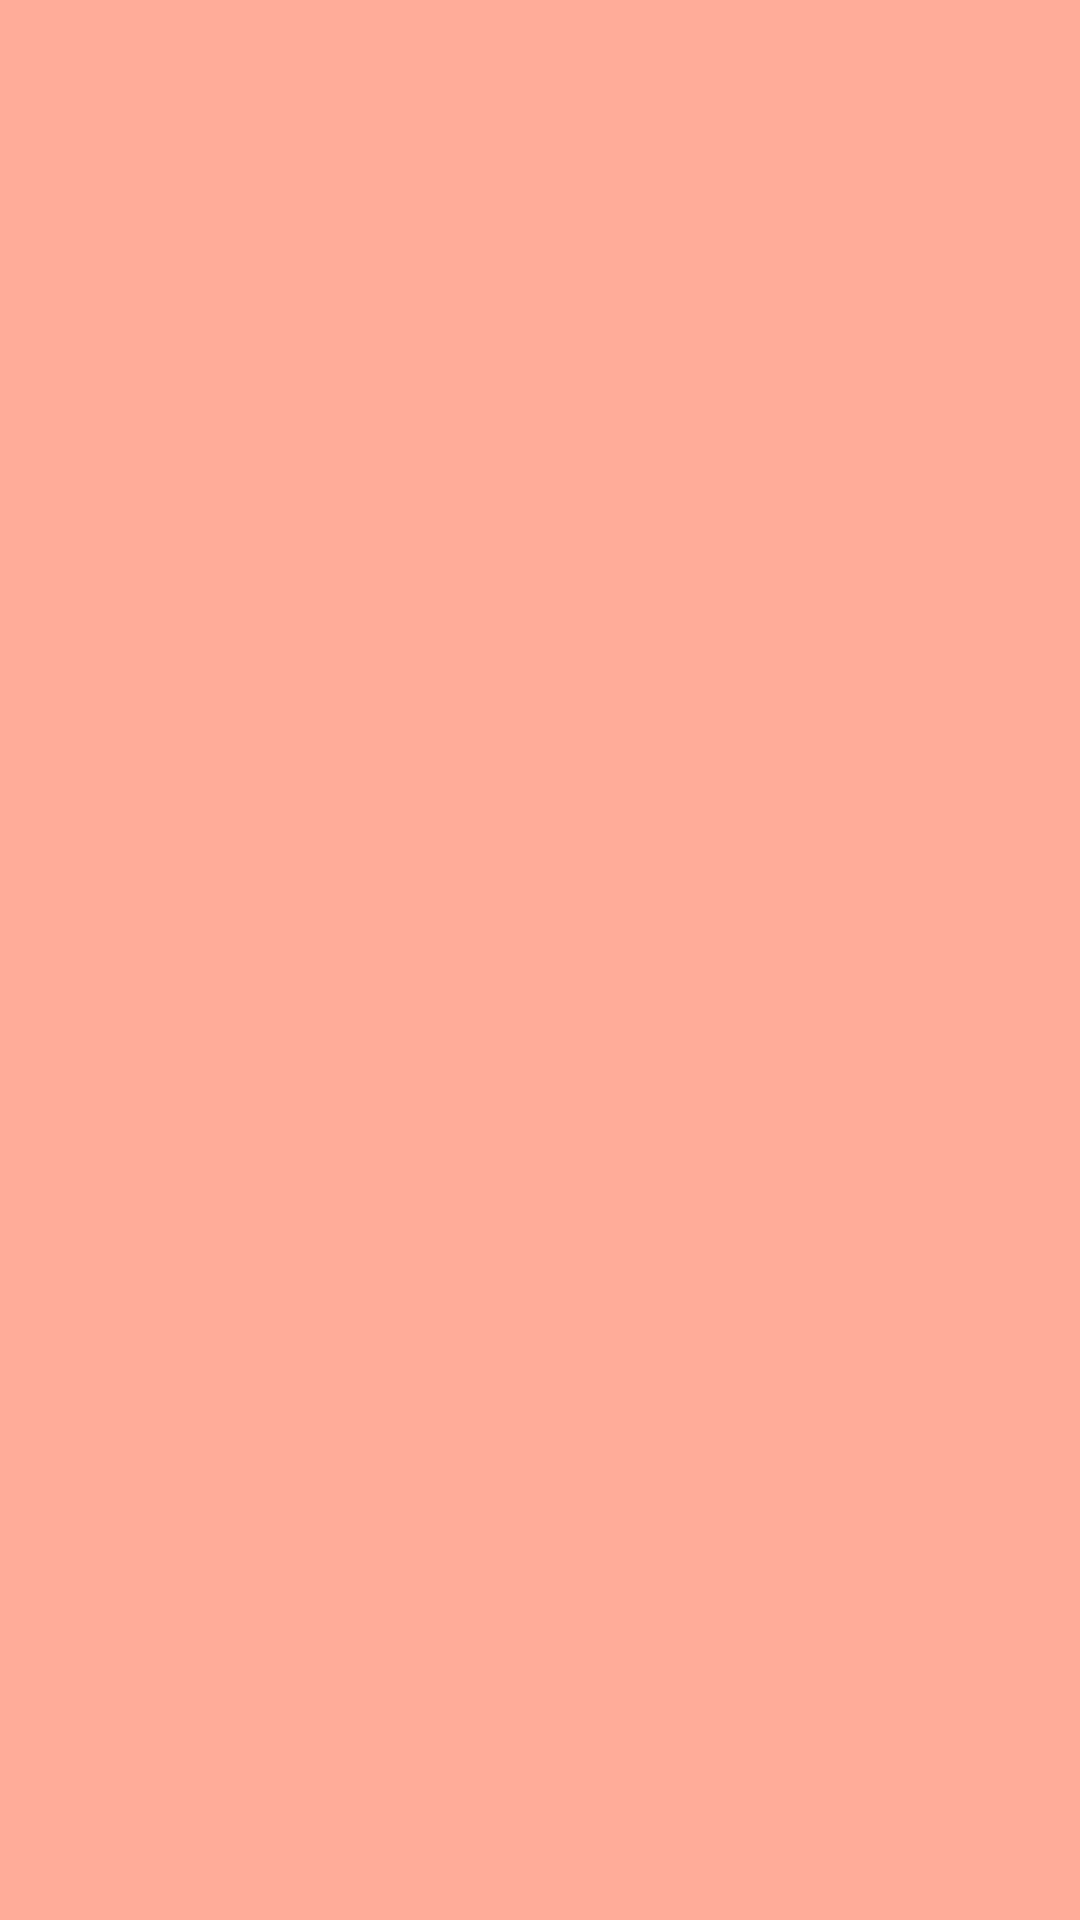 A pure salmon color, almost a neon pink. - Coral